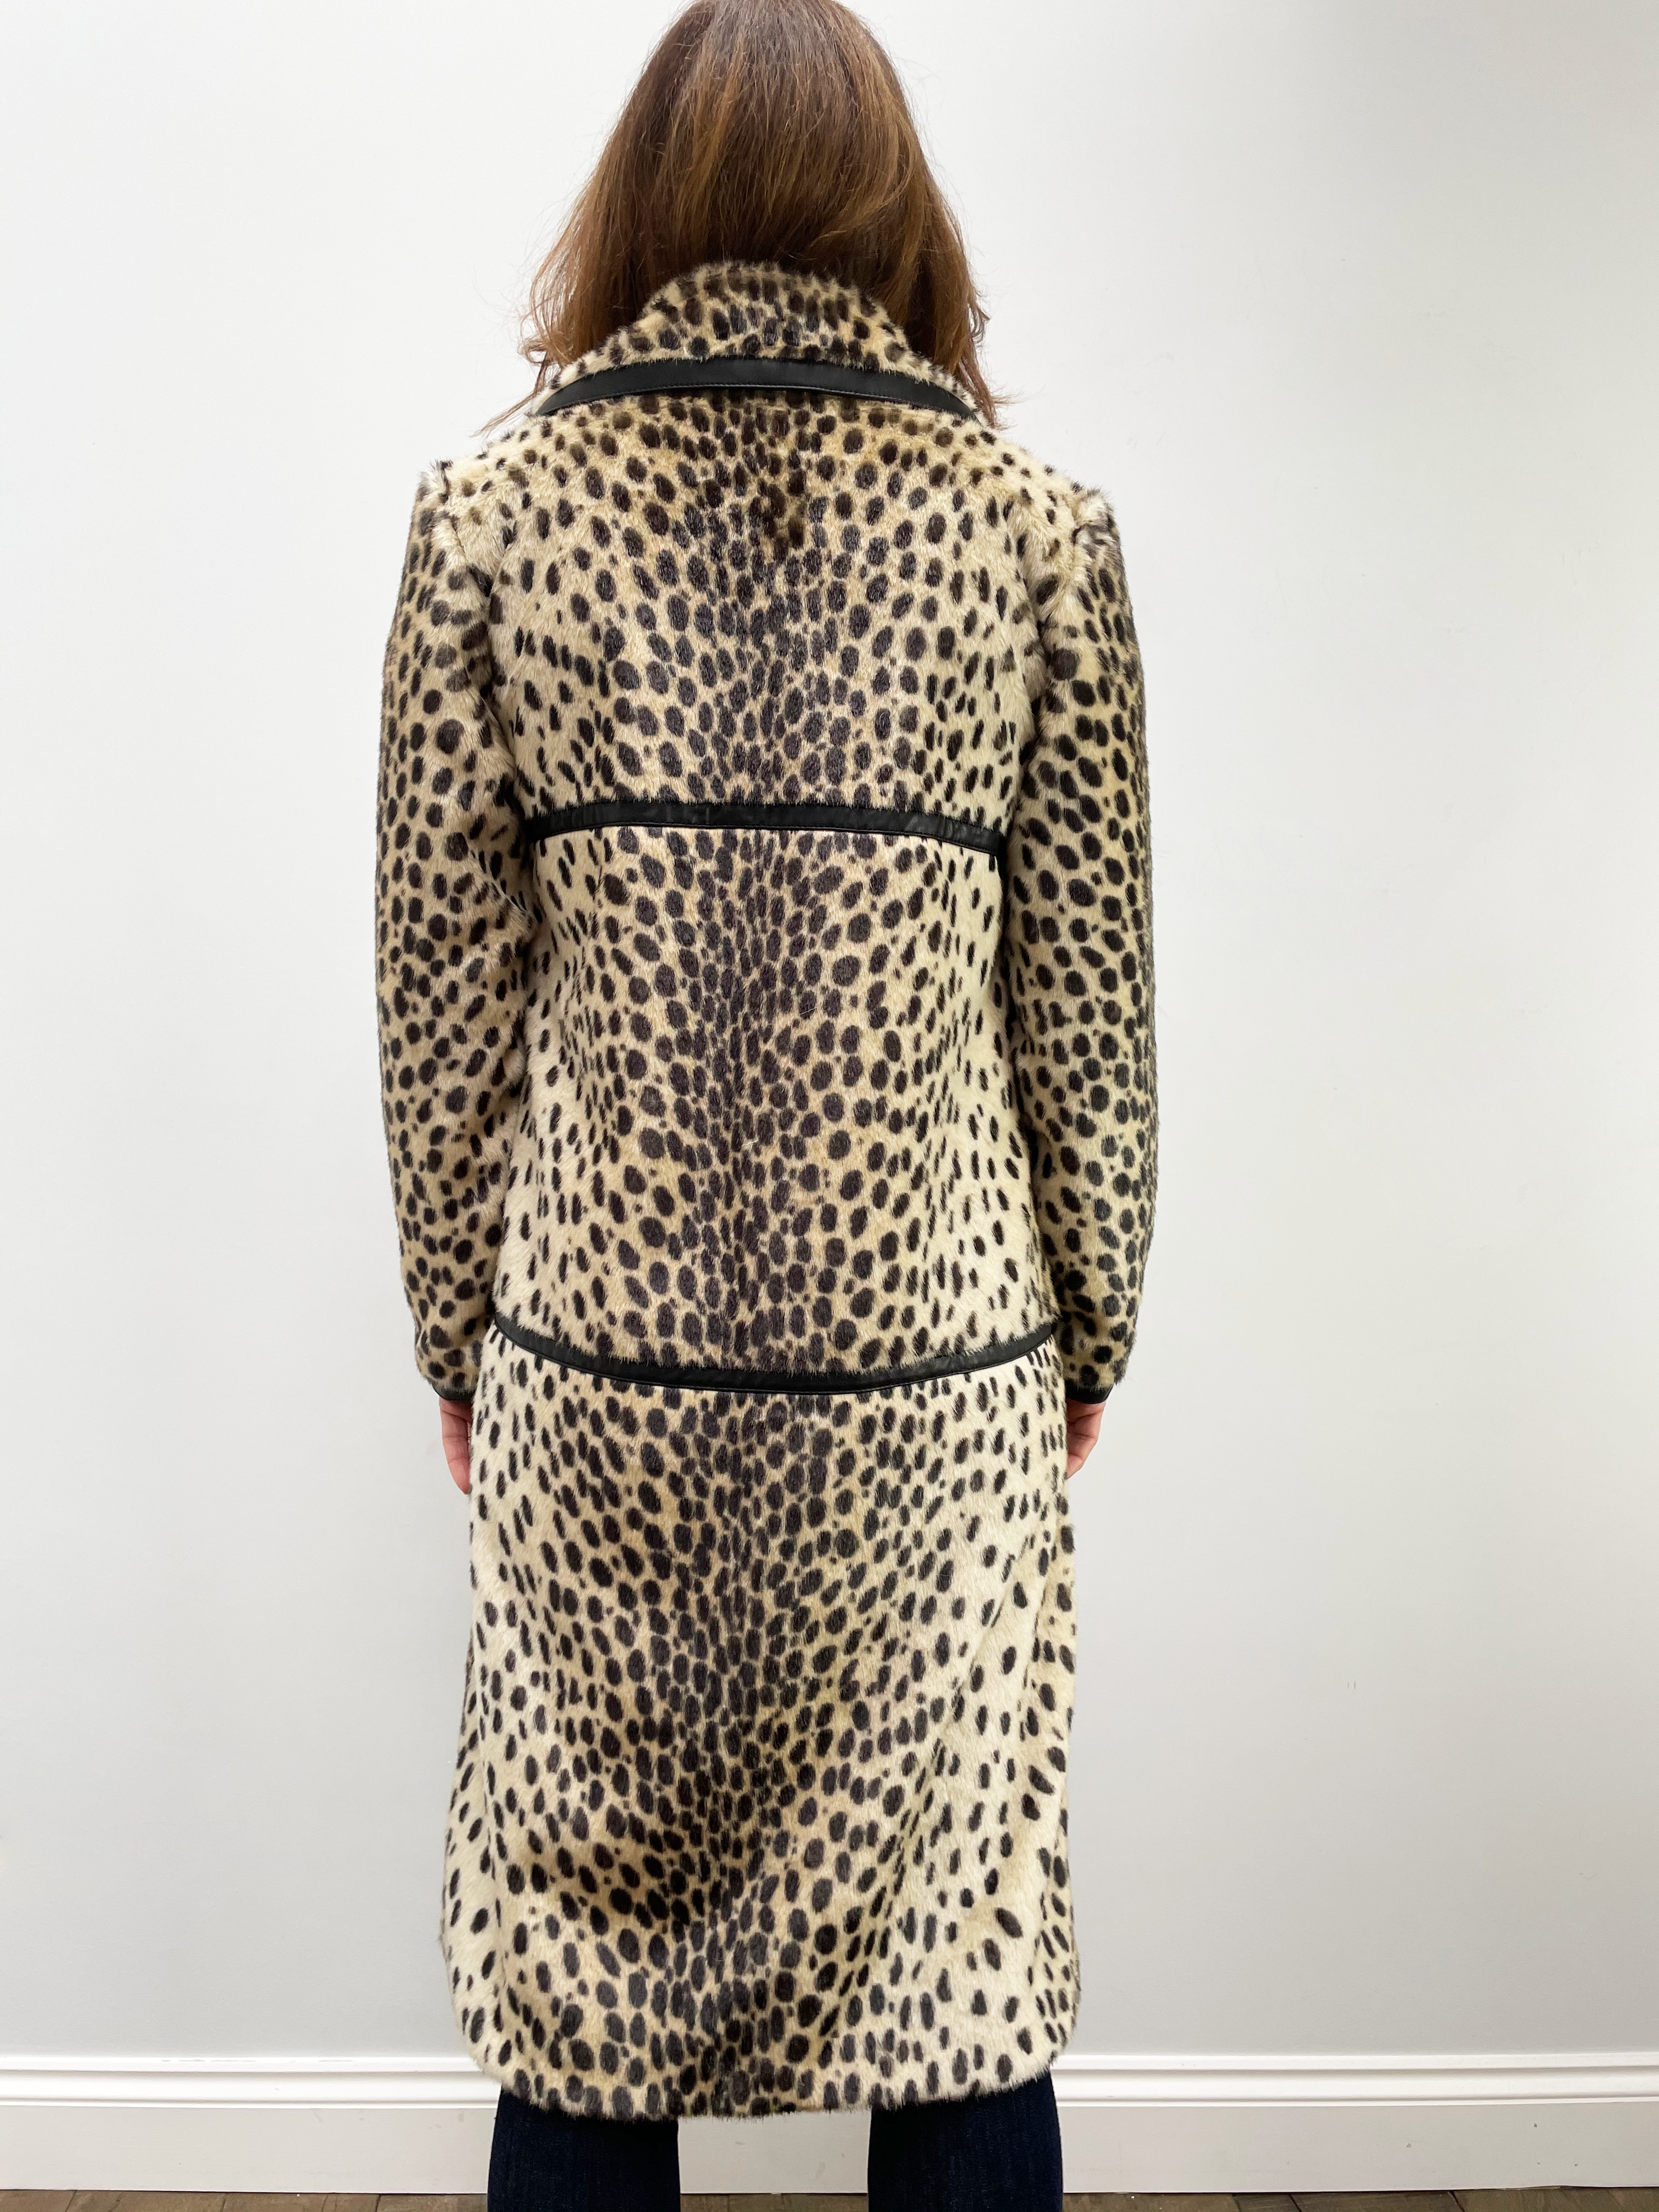 CS Dotty jacket in natural leopard